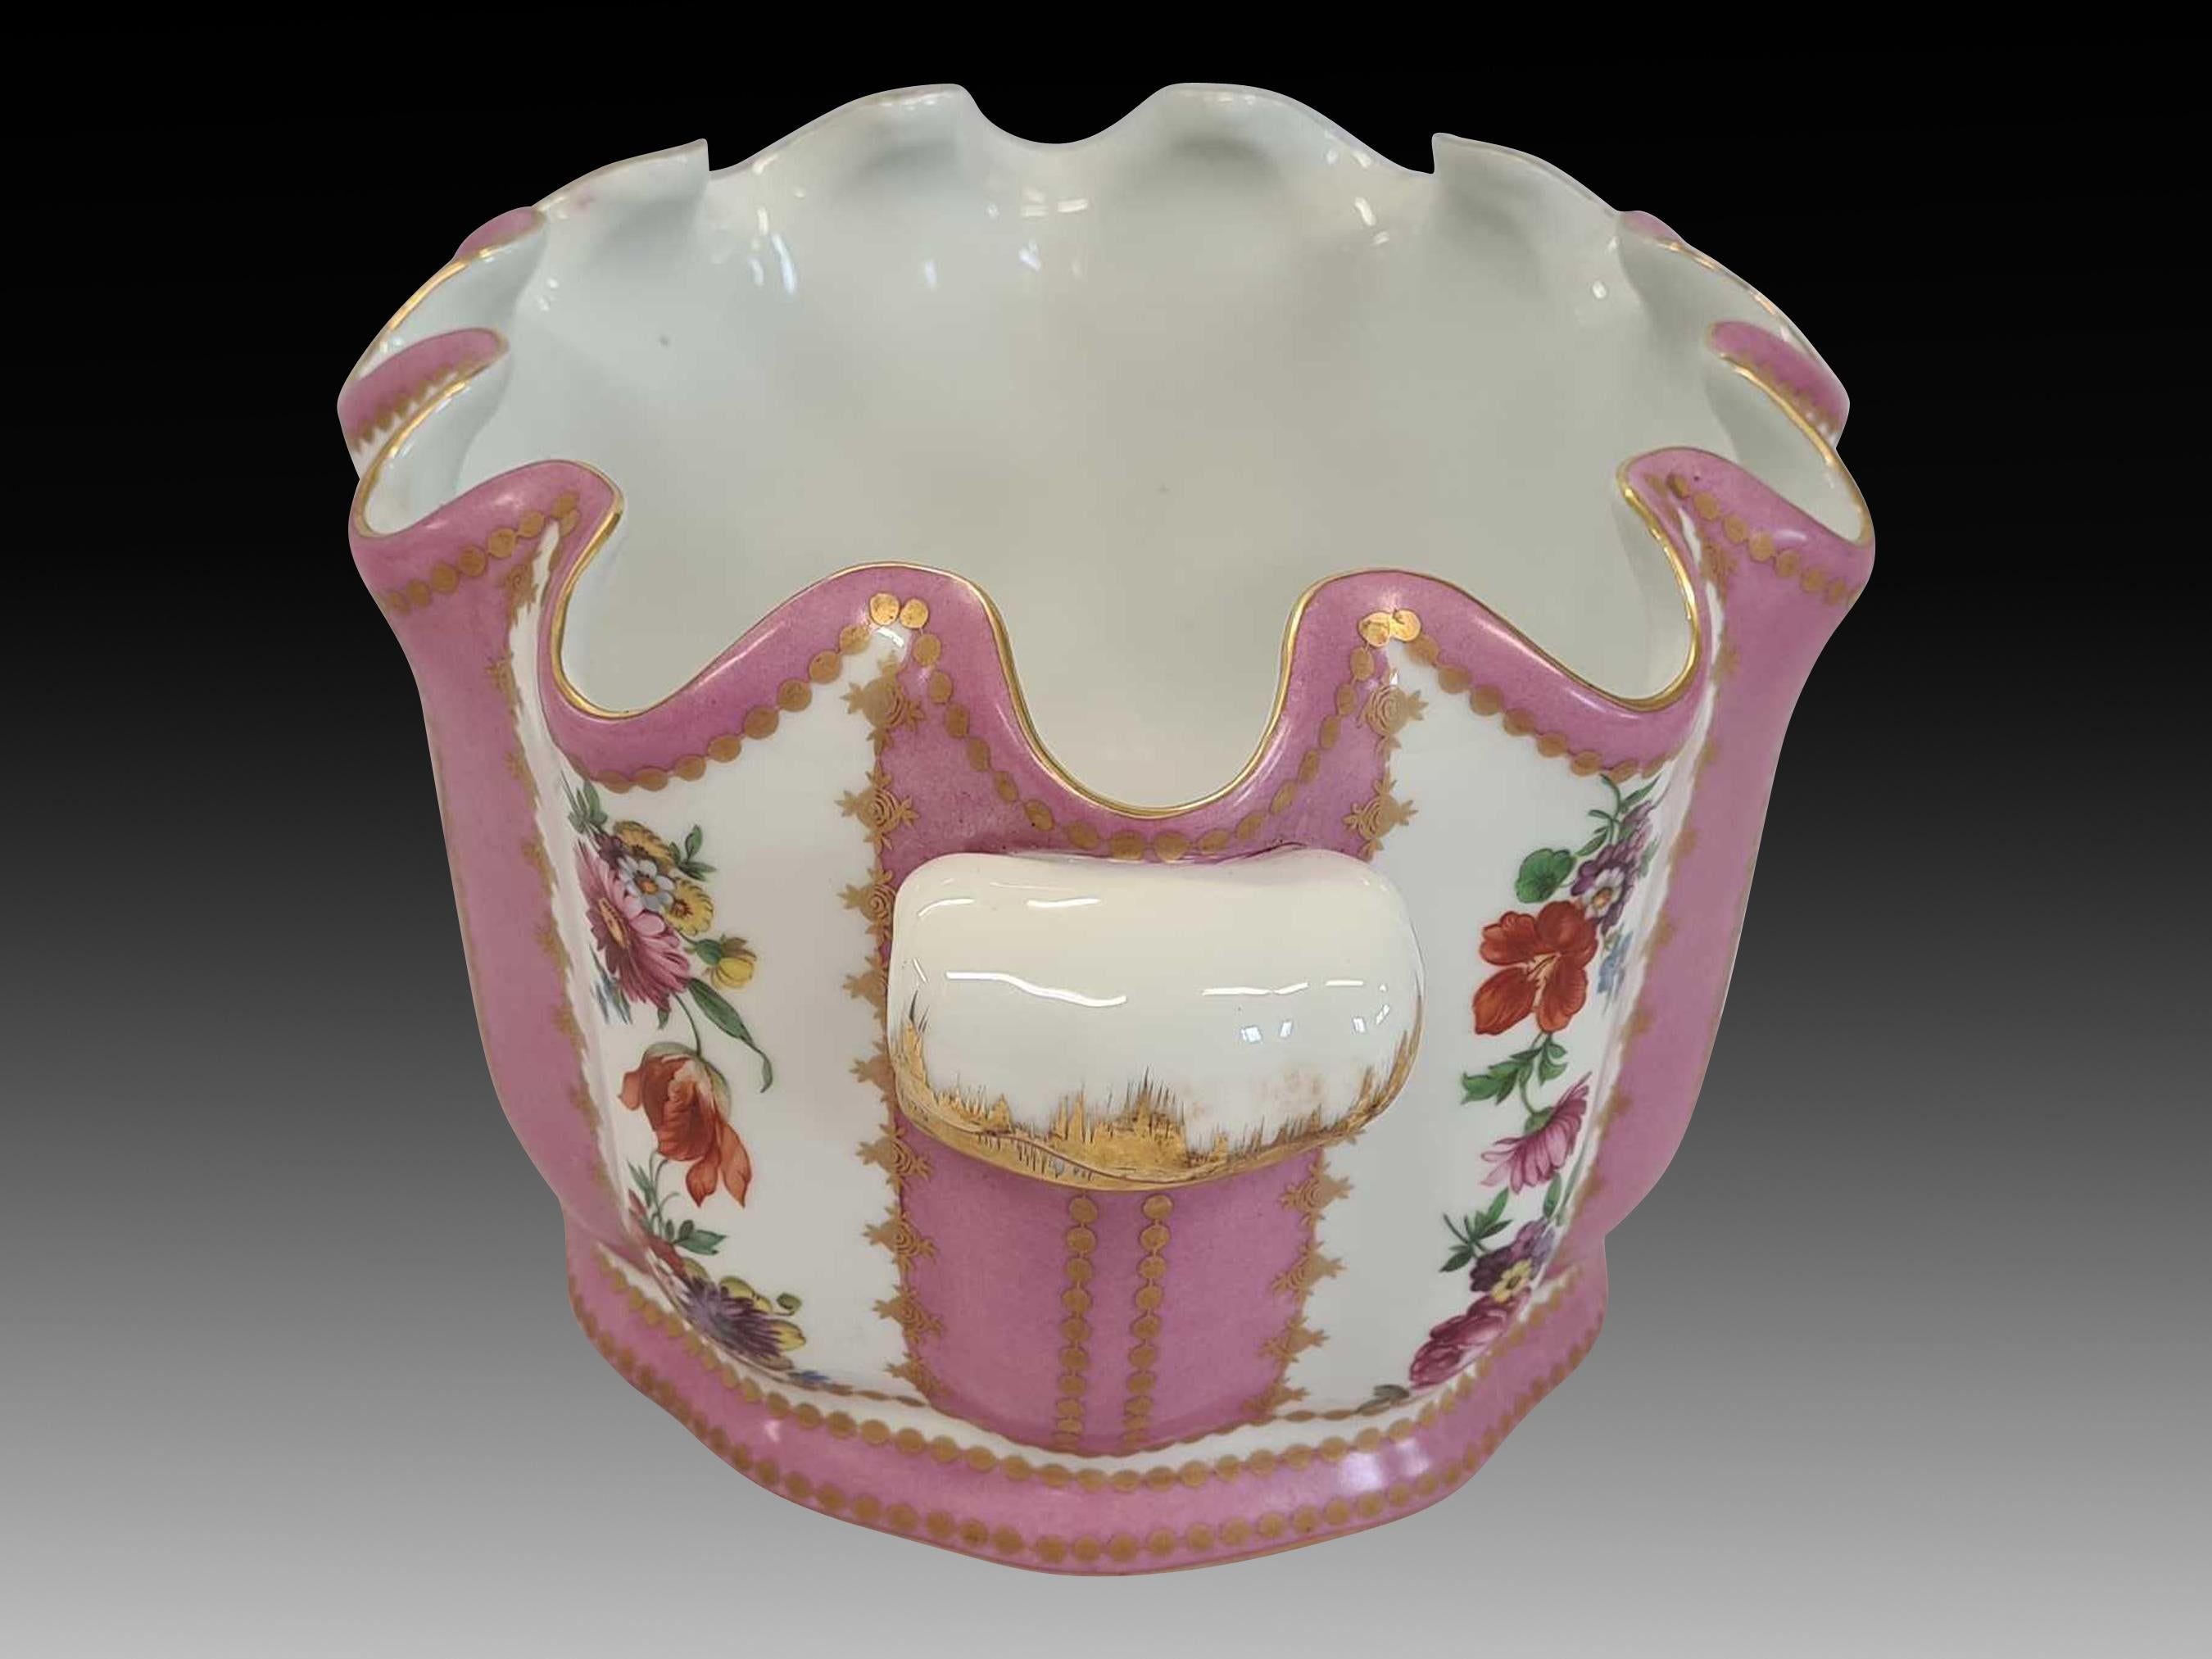 Magnificent Hand-Painted Floral Porcelaine Royale Jardinière In Excellent Condition For Sale In London, GB